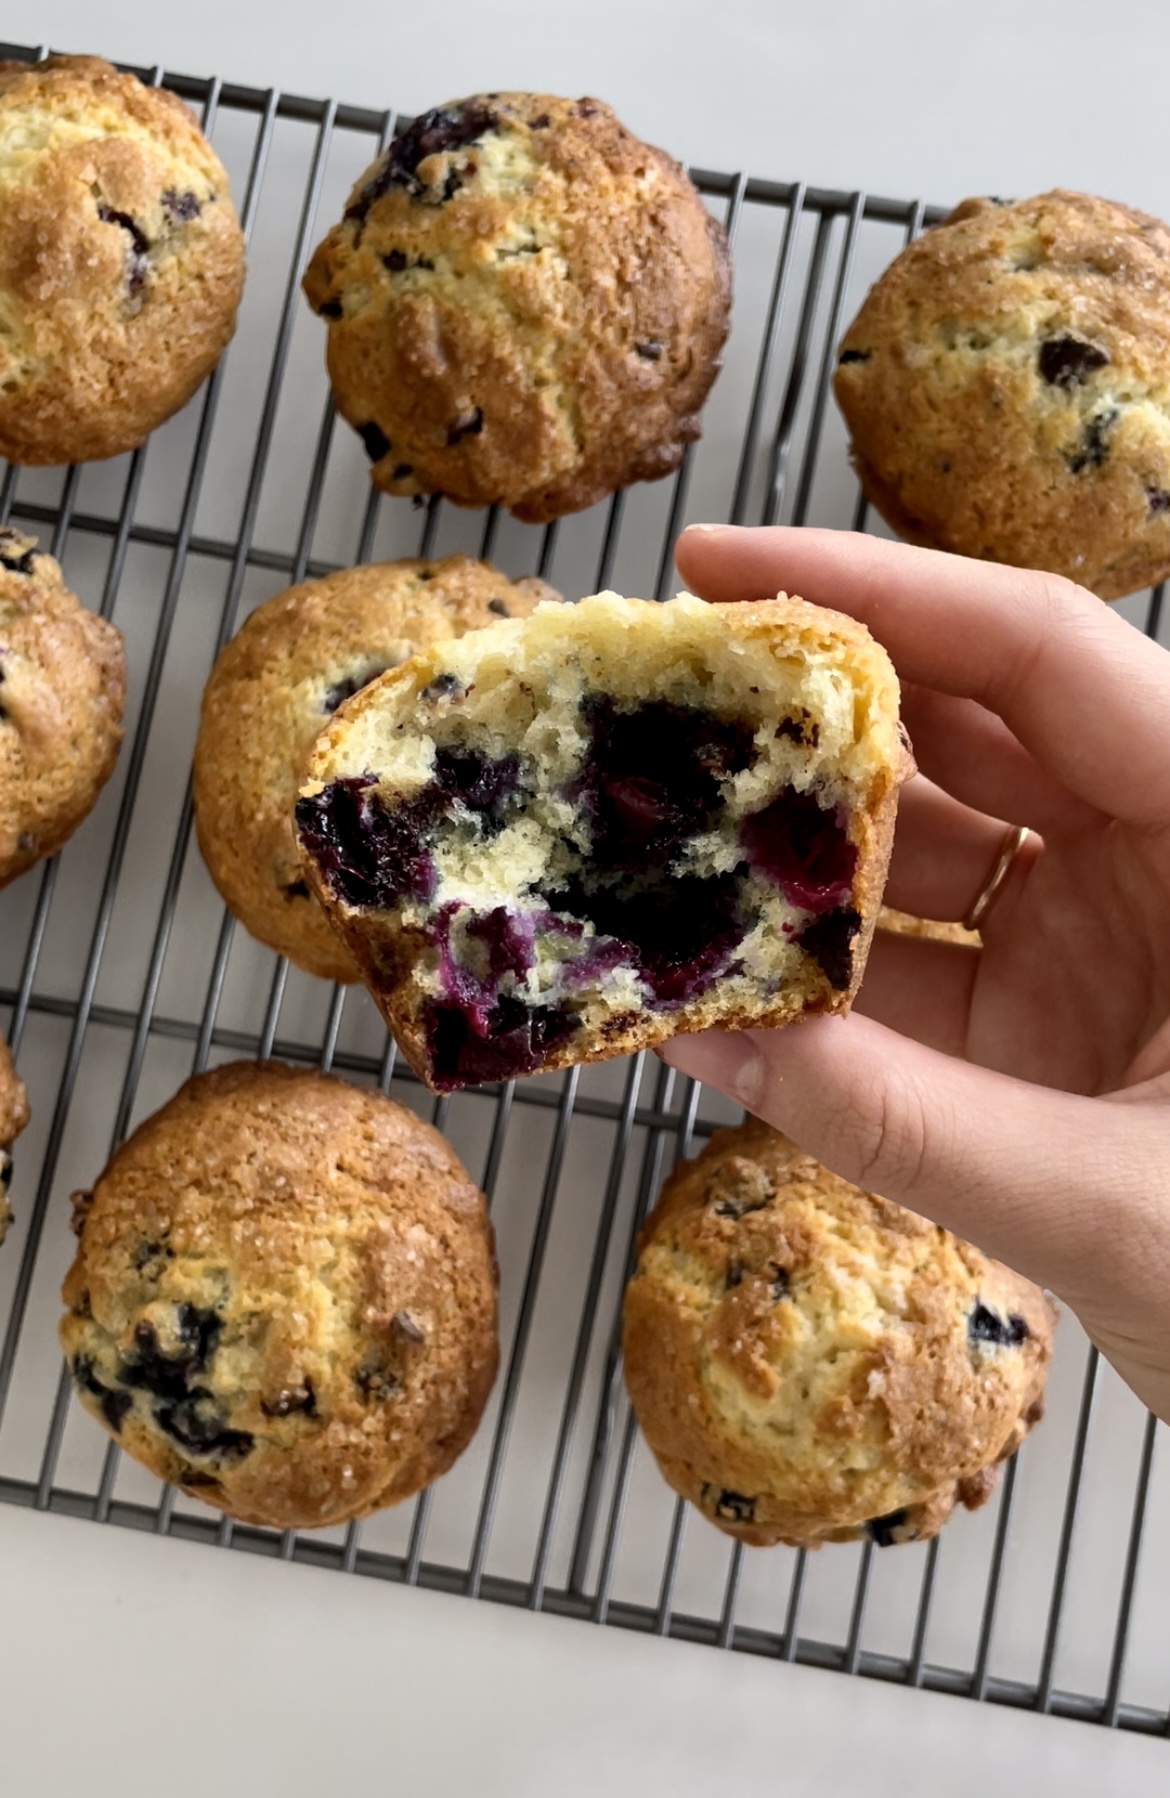 Blueberry Chocolate Chip Muffins - Dang That's Sweet